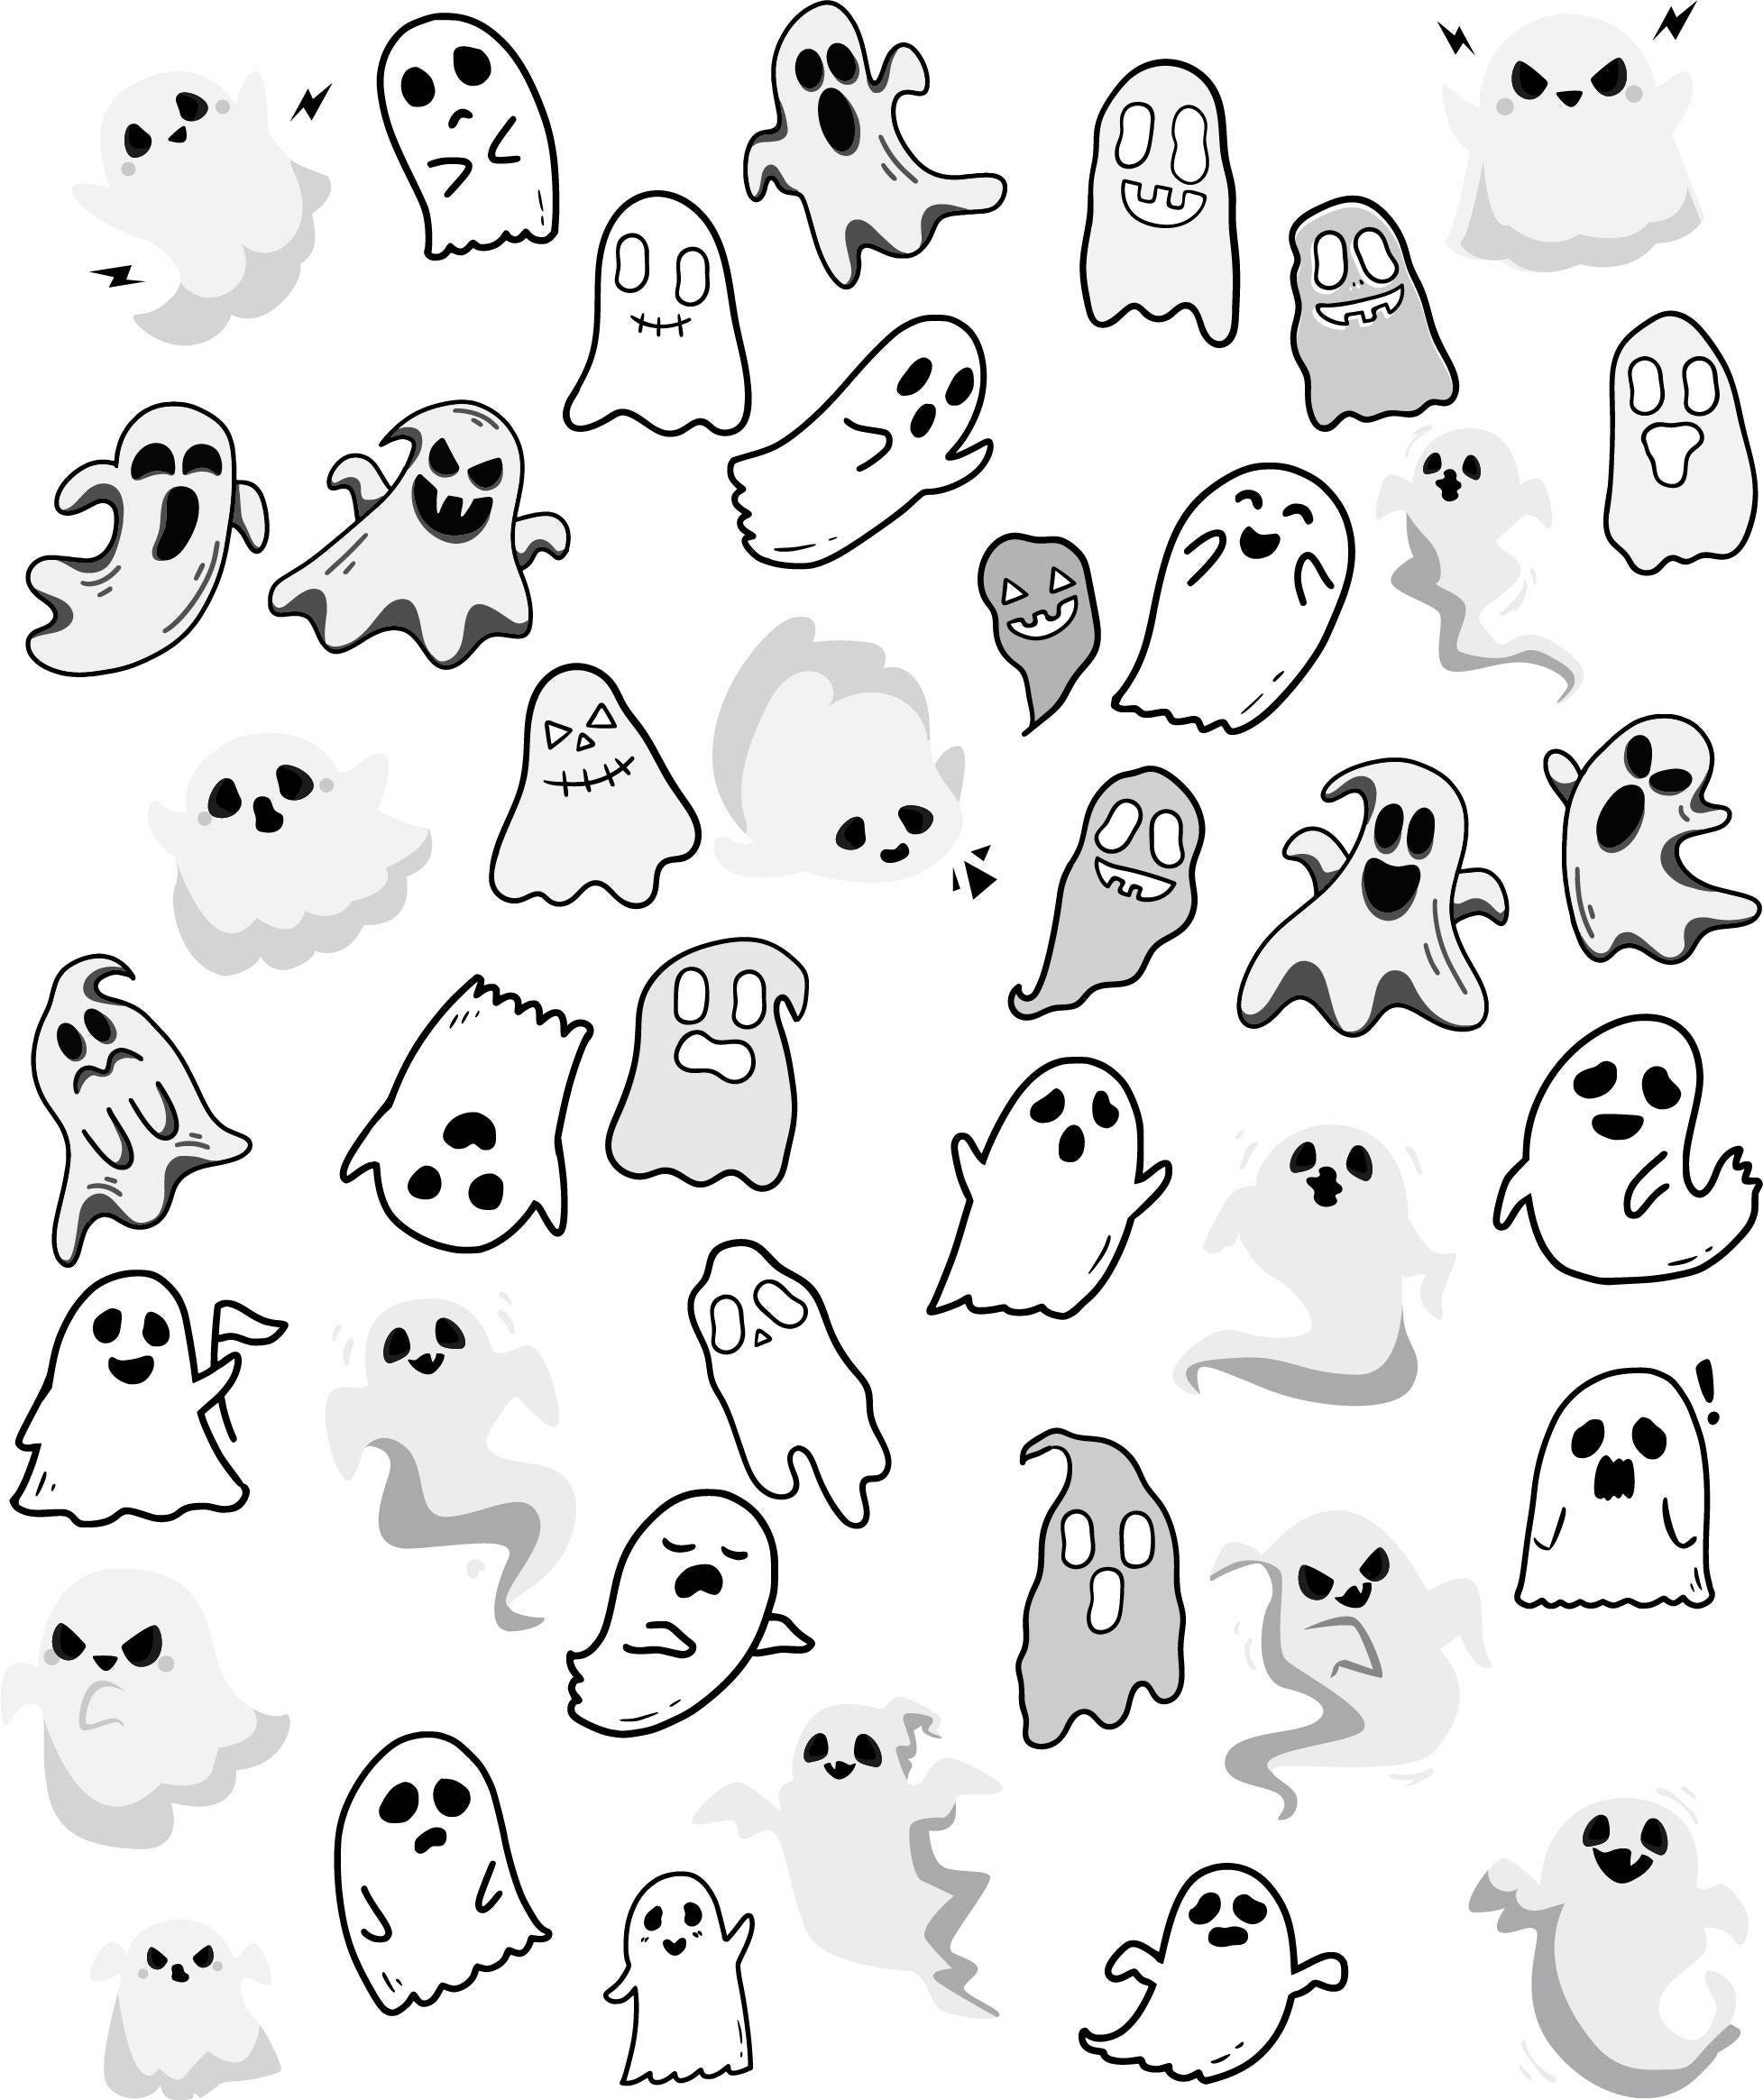 Cute Horror, horror cute character, cute horror svg, png character, ghost face svg, ghost, Halloween design, Halloween horror ghost clipart